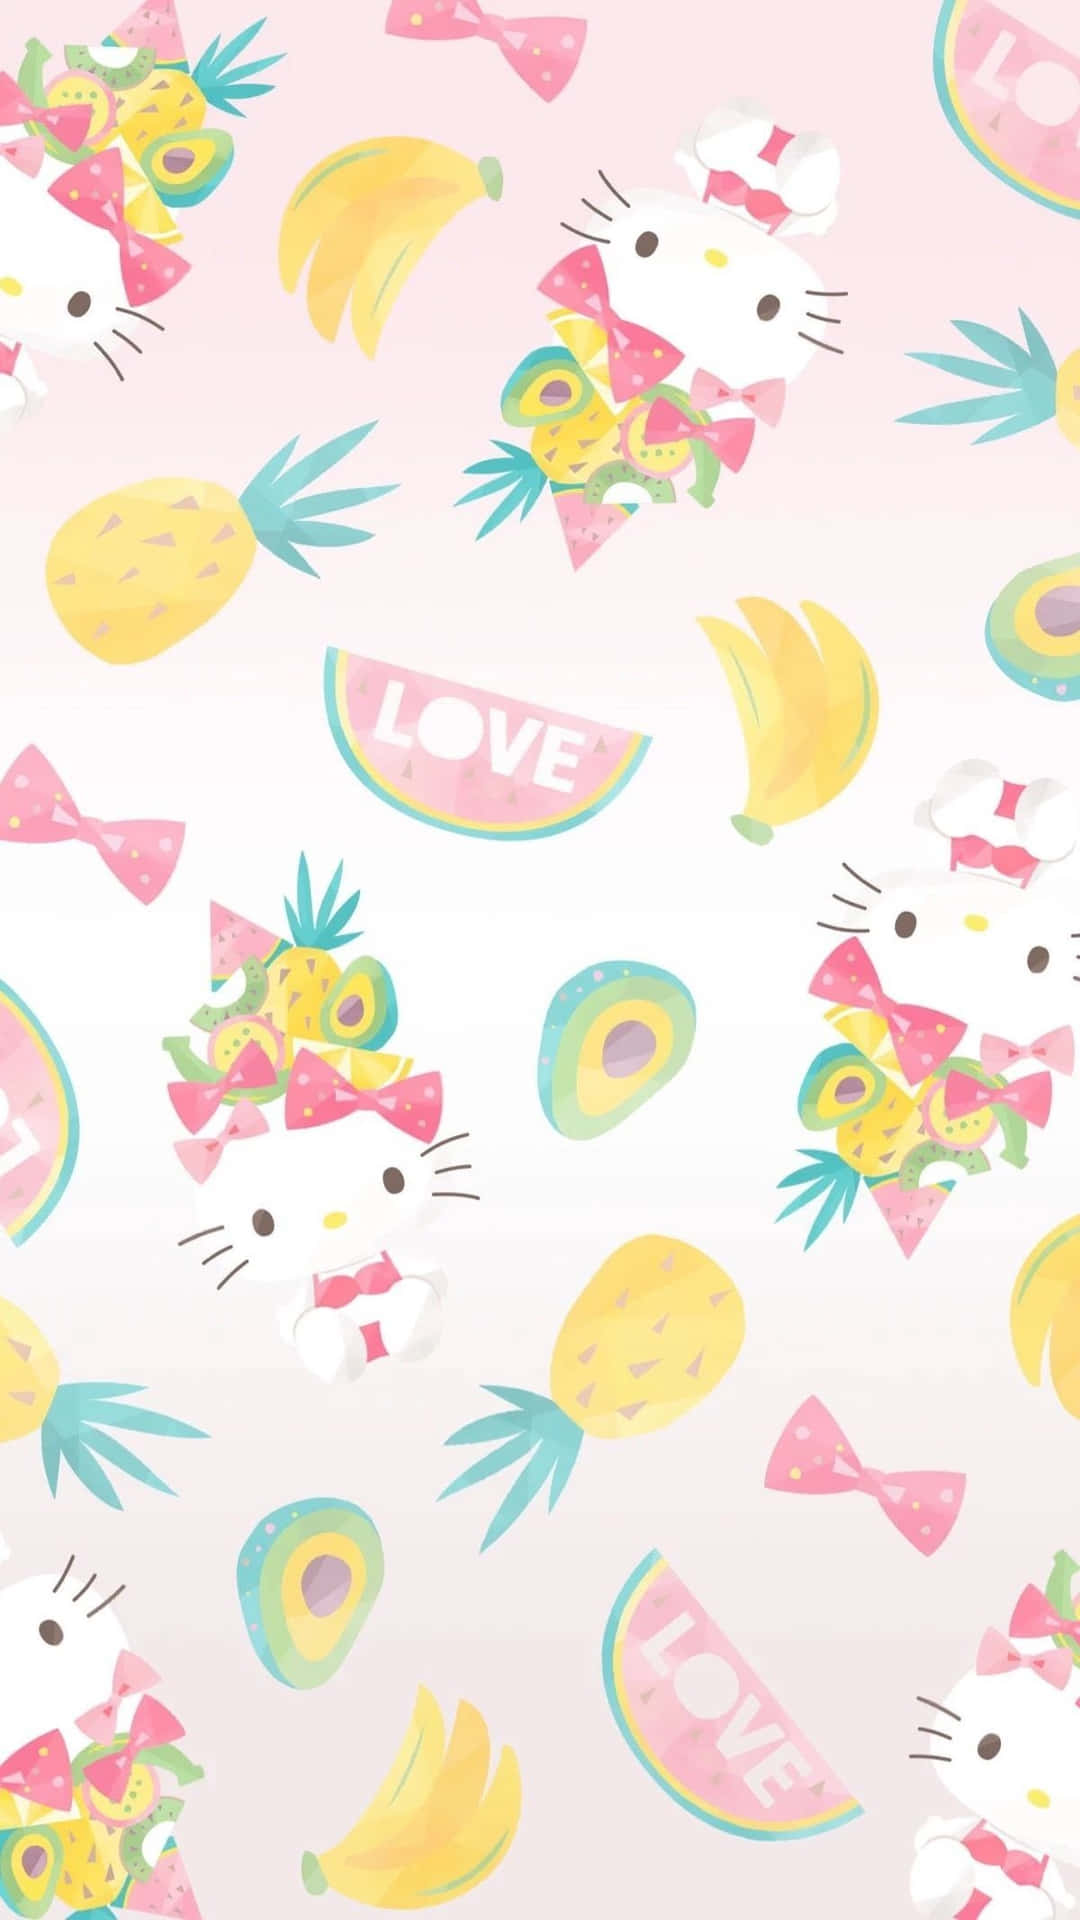 Keep in touch with your friends with the latest Sanrio Phone Wallpaper